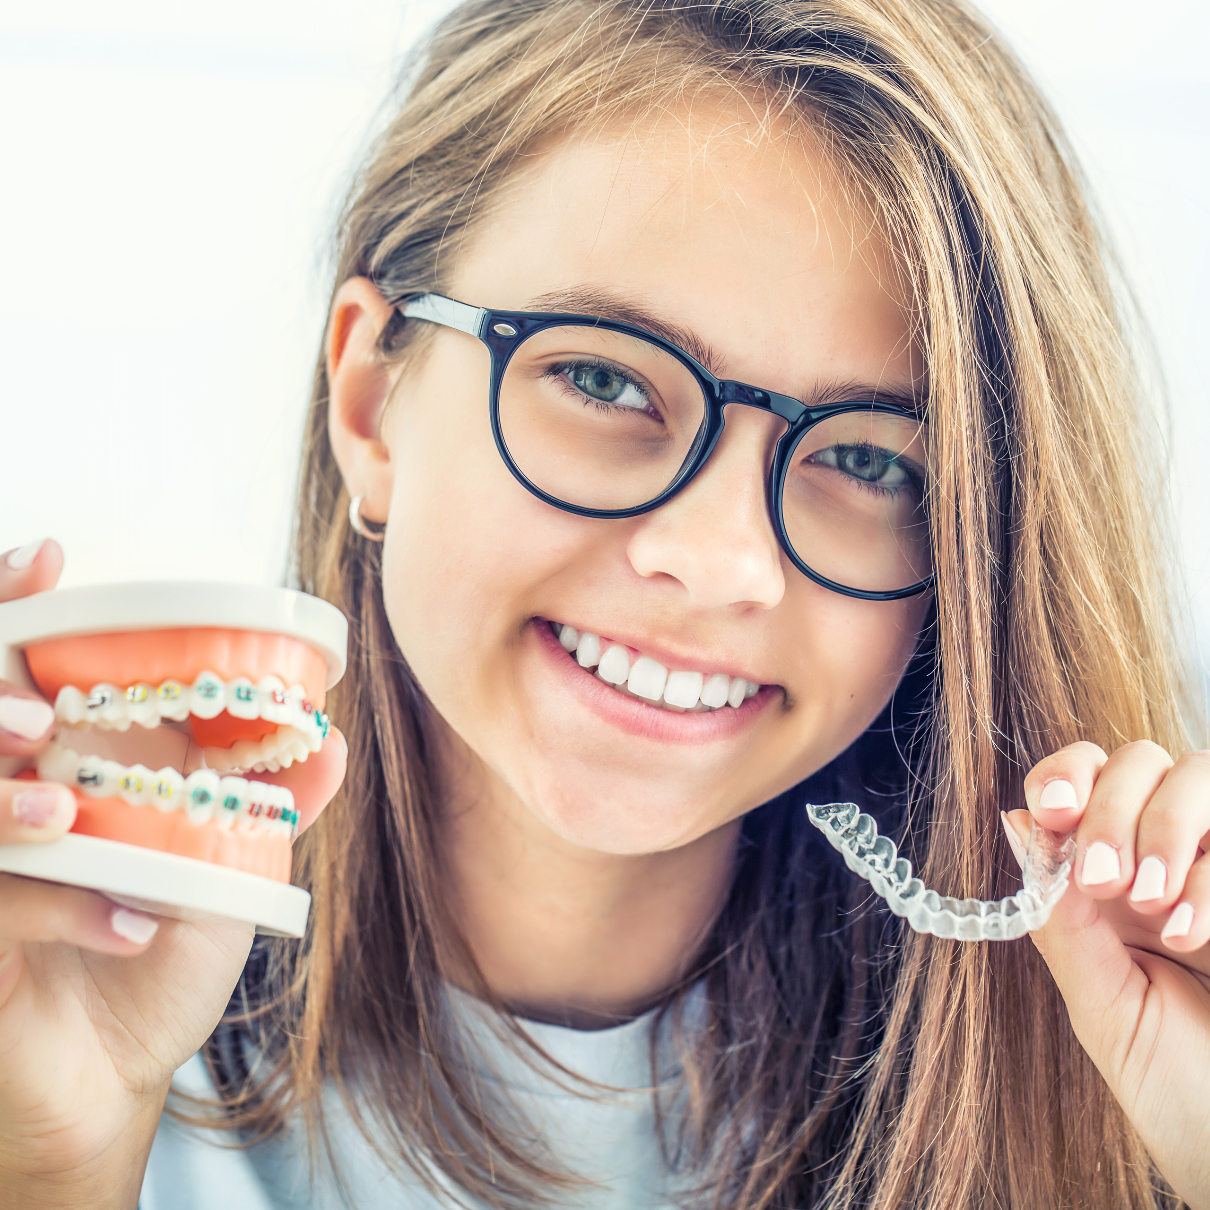 Teenage girl holding an example of braces and invisalign